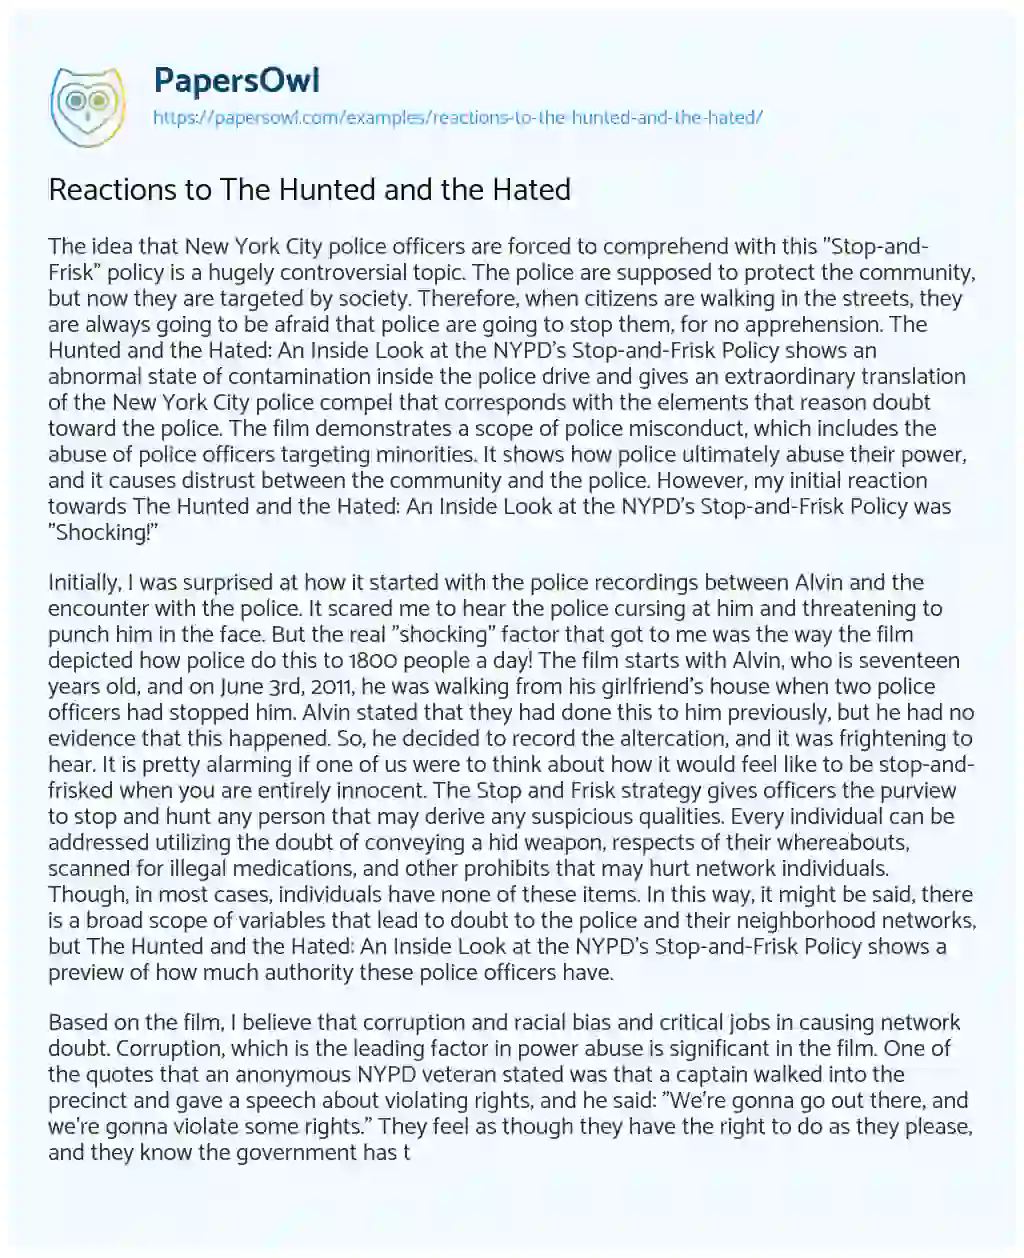 Essay on Reactions to the Hunted and the Hated